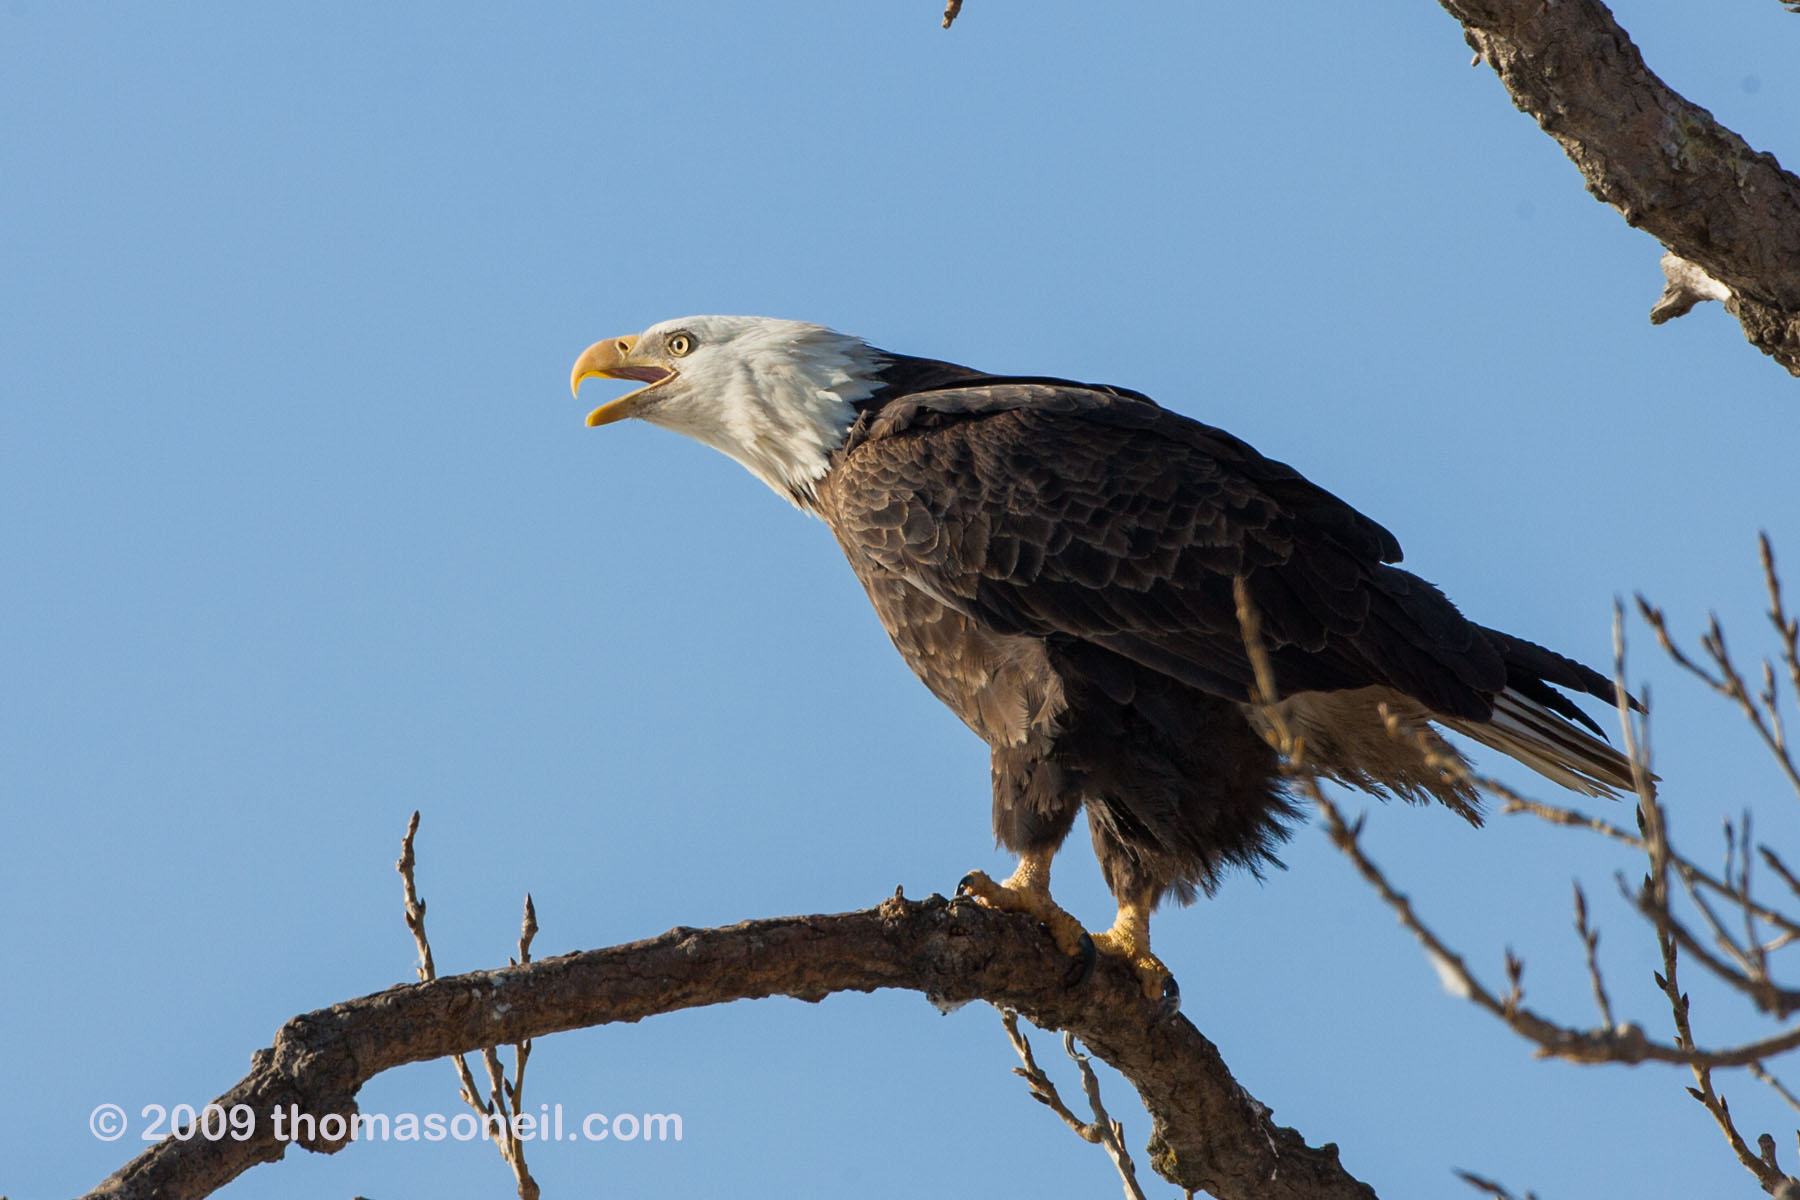 Bald eagle vocalizing near the Mississippi River in Keokuk, Iowa.  Click for next photo.